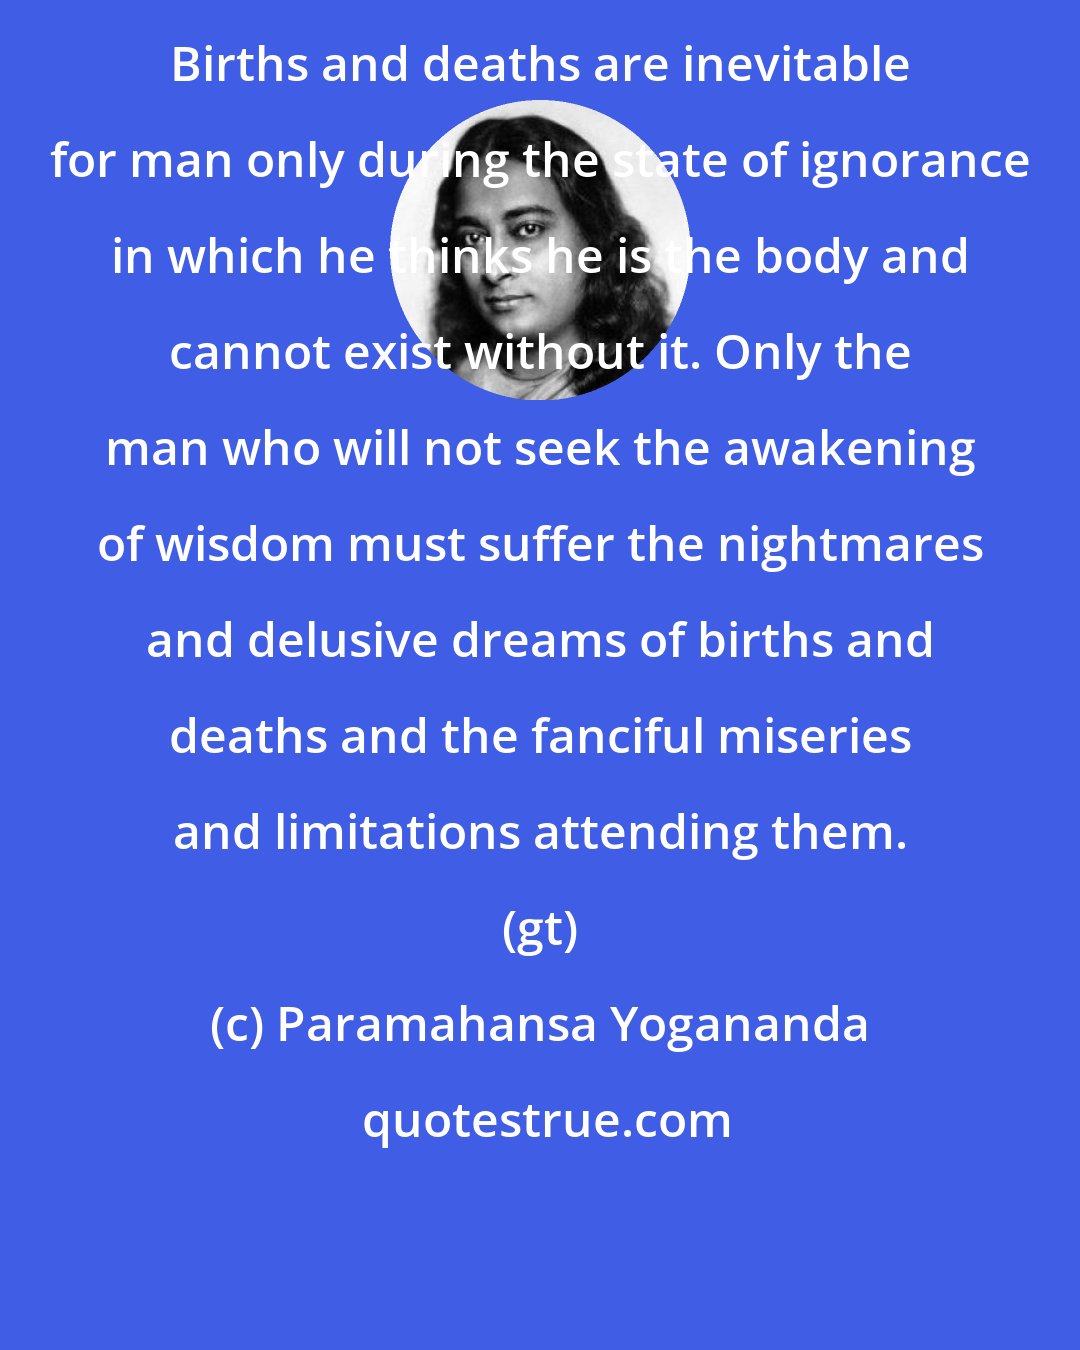 Paramahansa Yogananda: Births and deaths are inevitable for man only during the state of ignorance in which he thinks he is the body and cannot exist without it. Only the man who will not seek the awakening of wisdom must suffer the nightmares and delusive dreams of births and deaths and the fanciful miseries and limitations attending them. (gt)